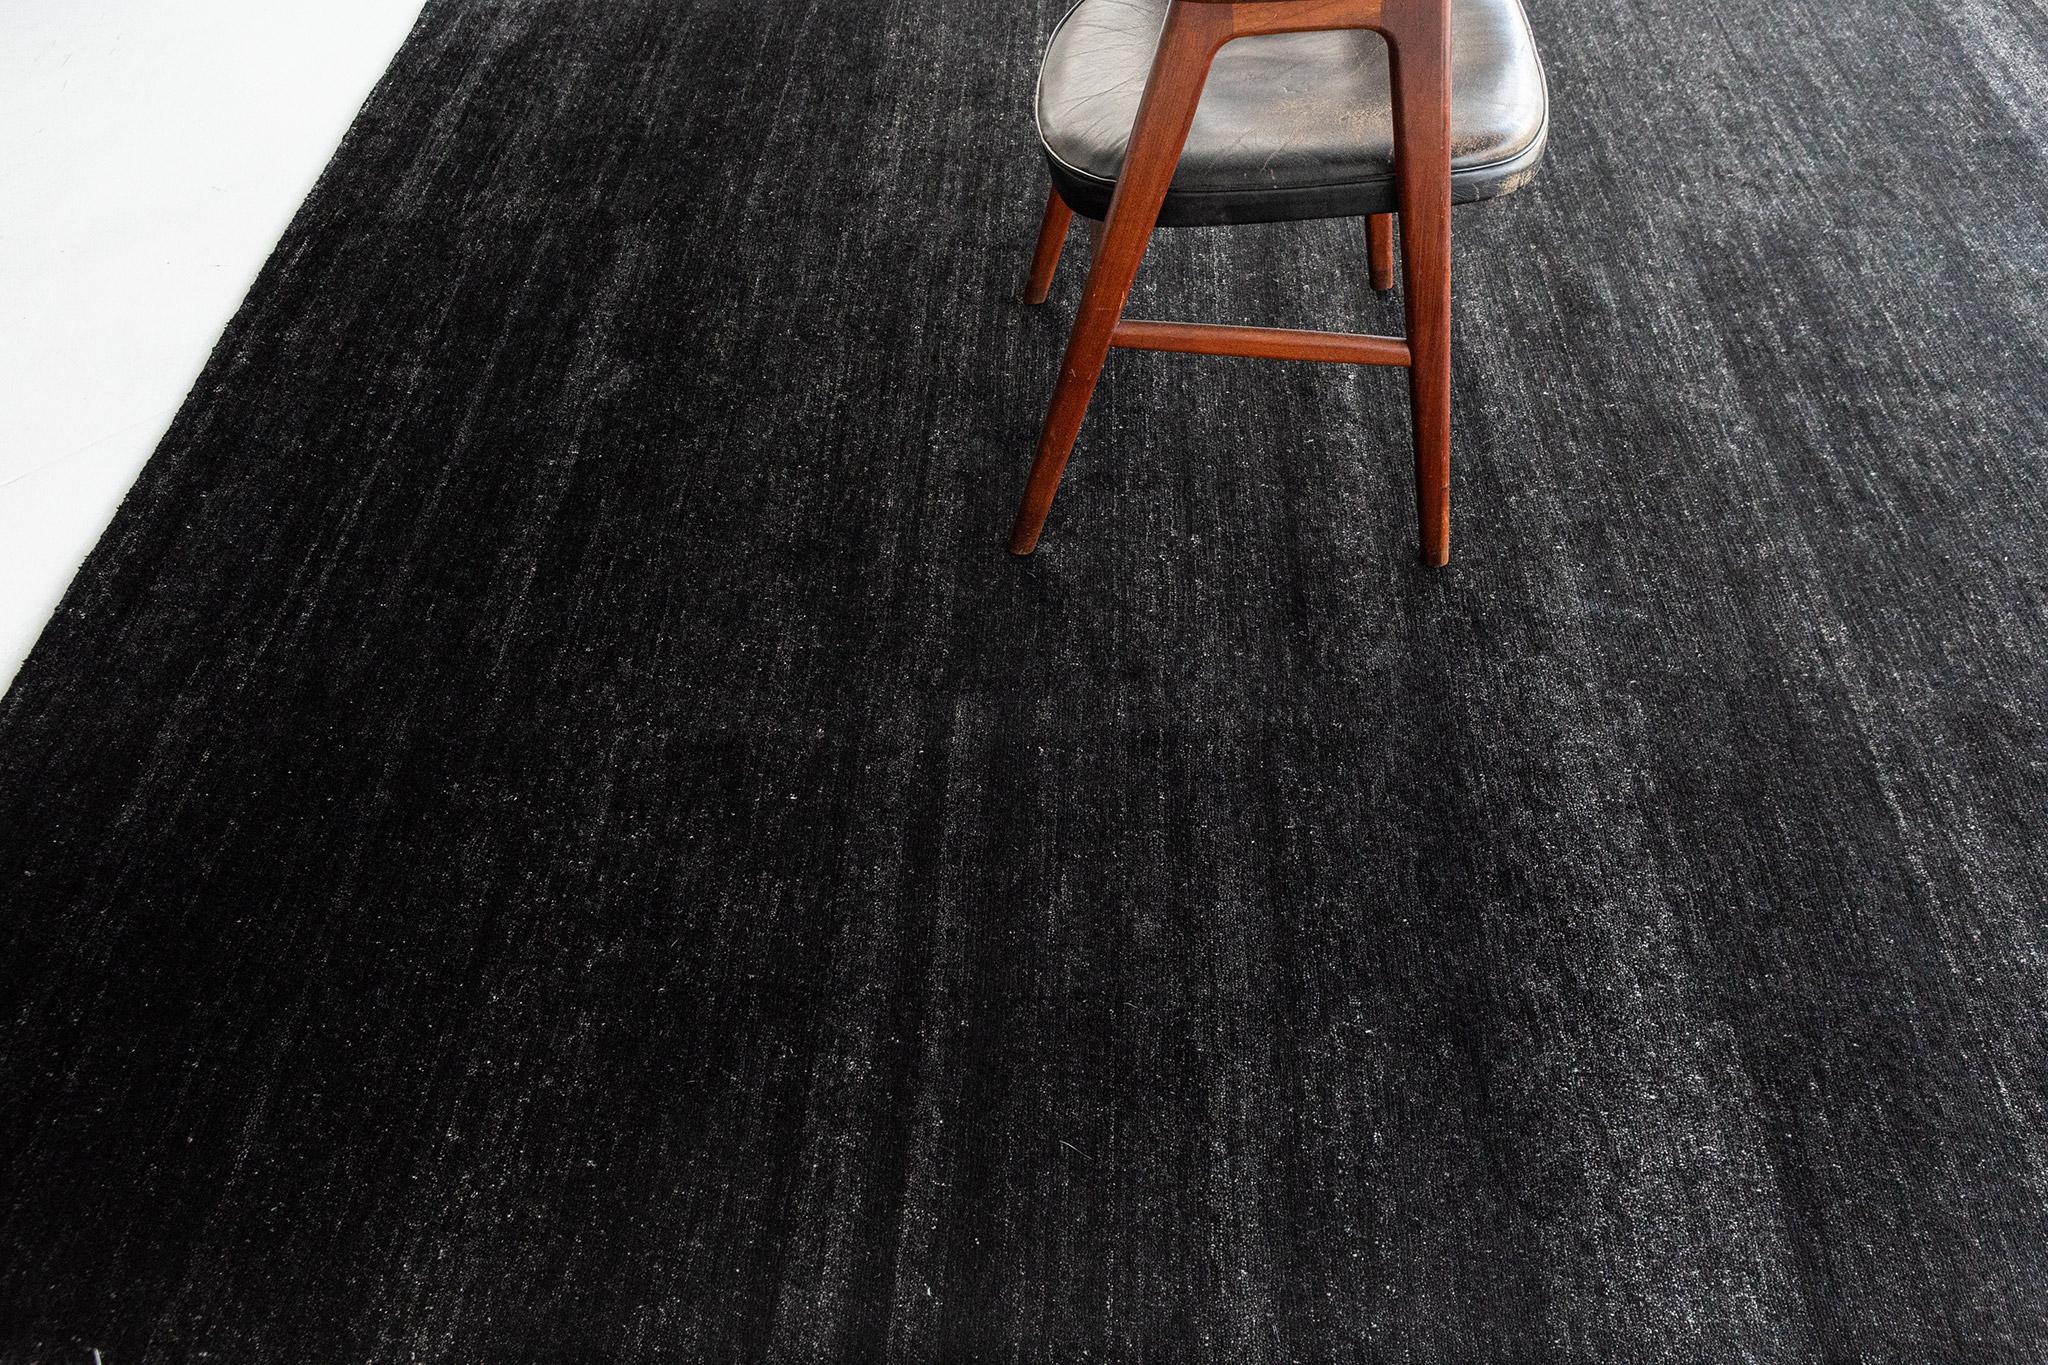 Dara' is a solid bamboo silk rug in the perfect black tone. Its simplicity does not take away from the rug's luxurious quality and beautiful sheen. Dara is a splendid rug for any design space.

Rug Number
20287
Size
7' 9